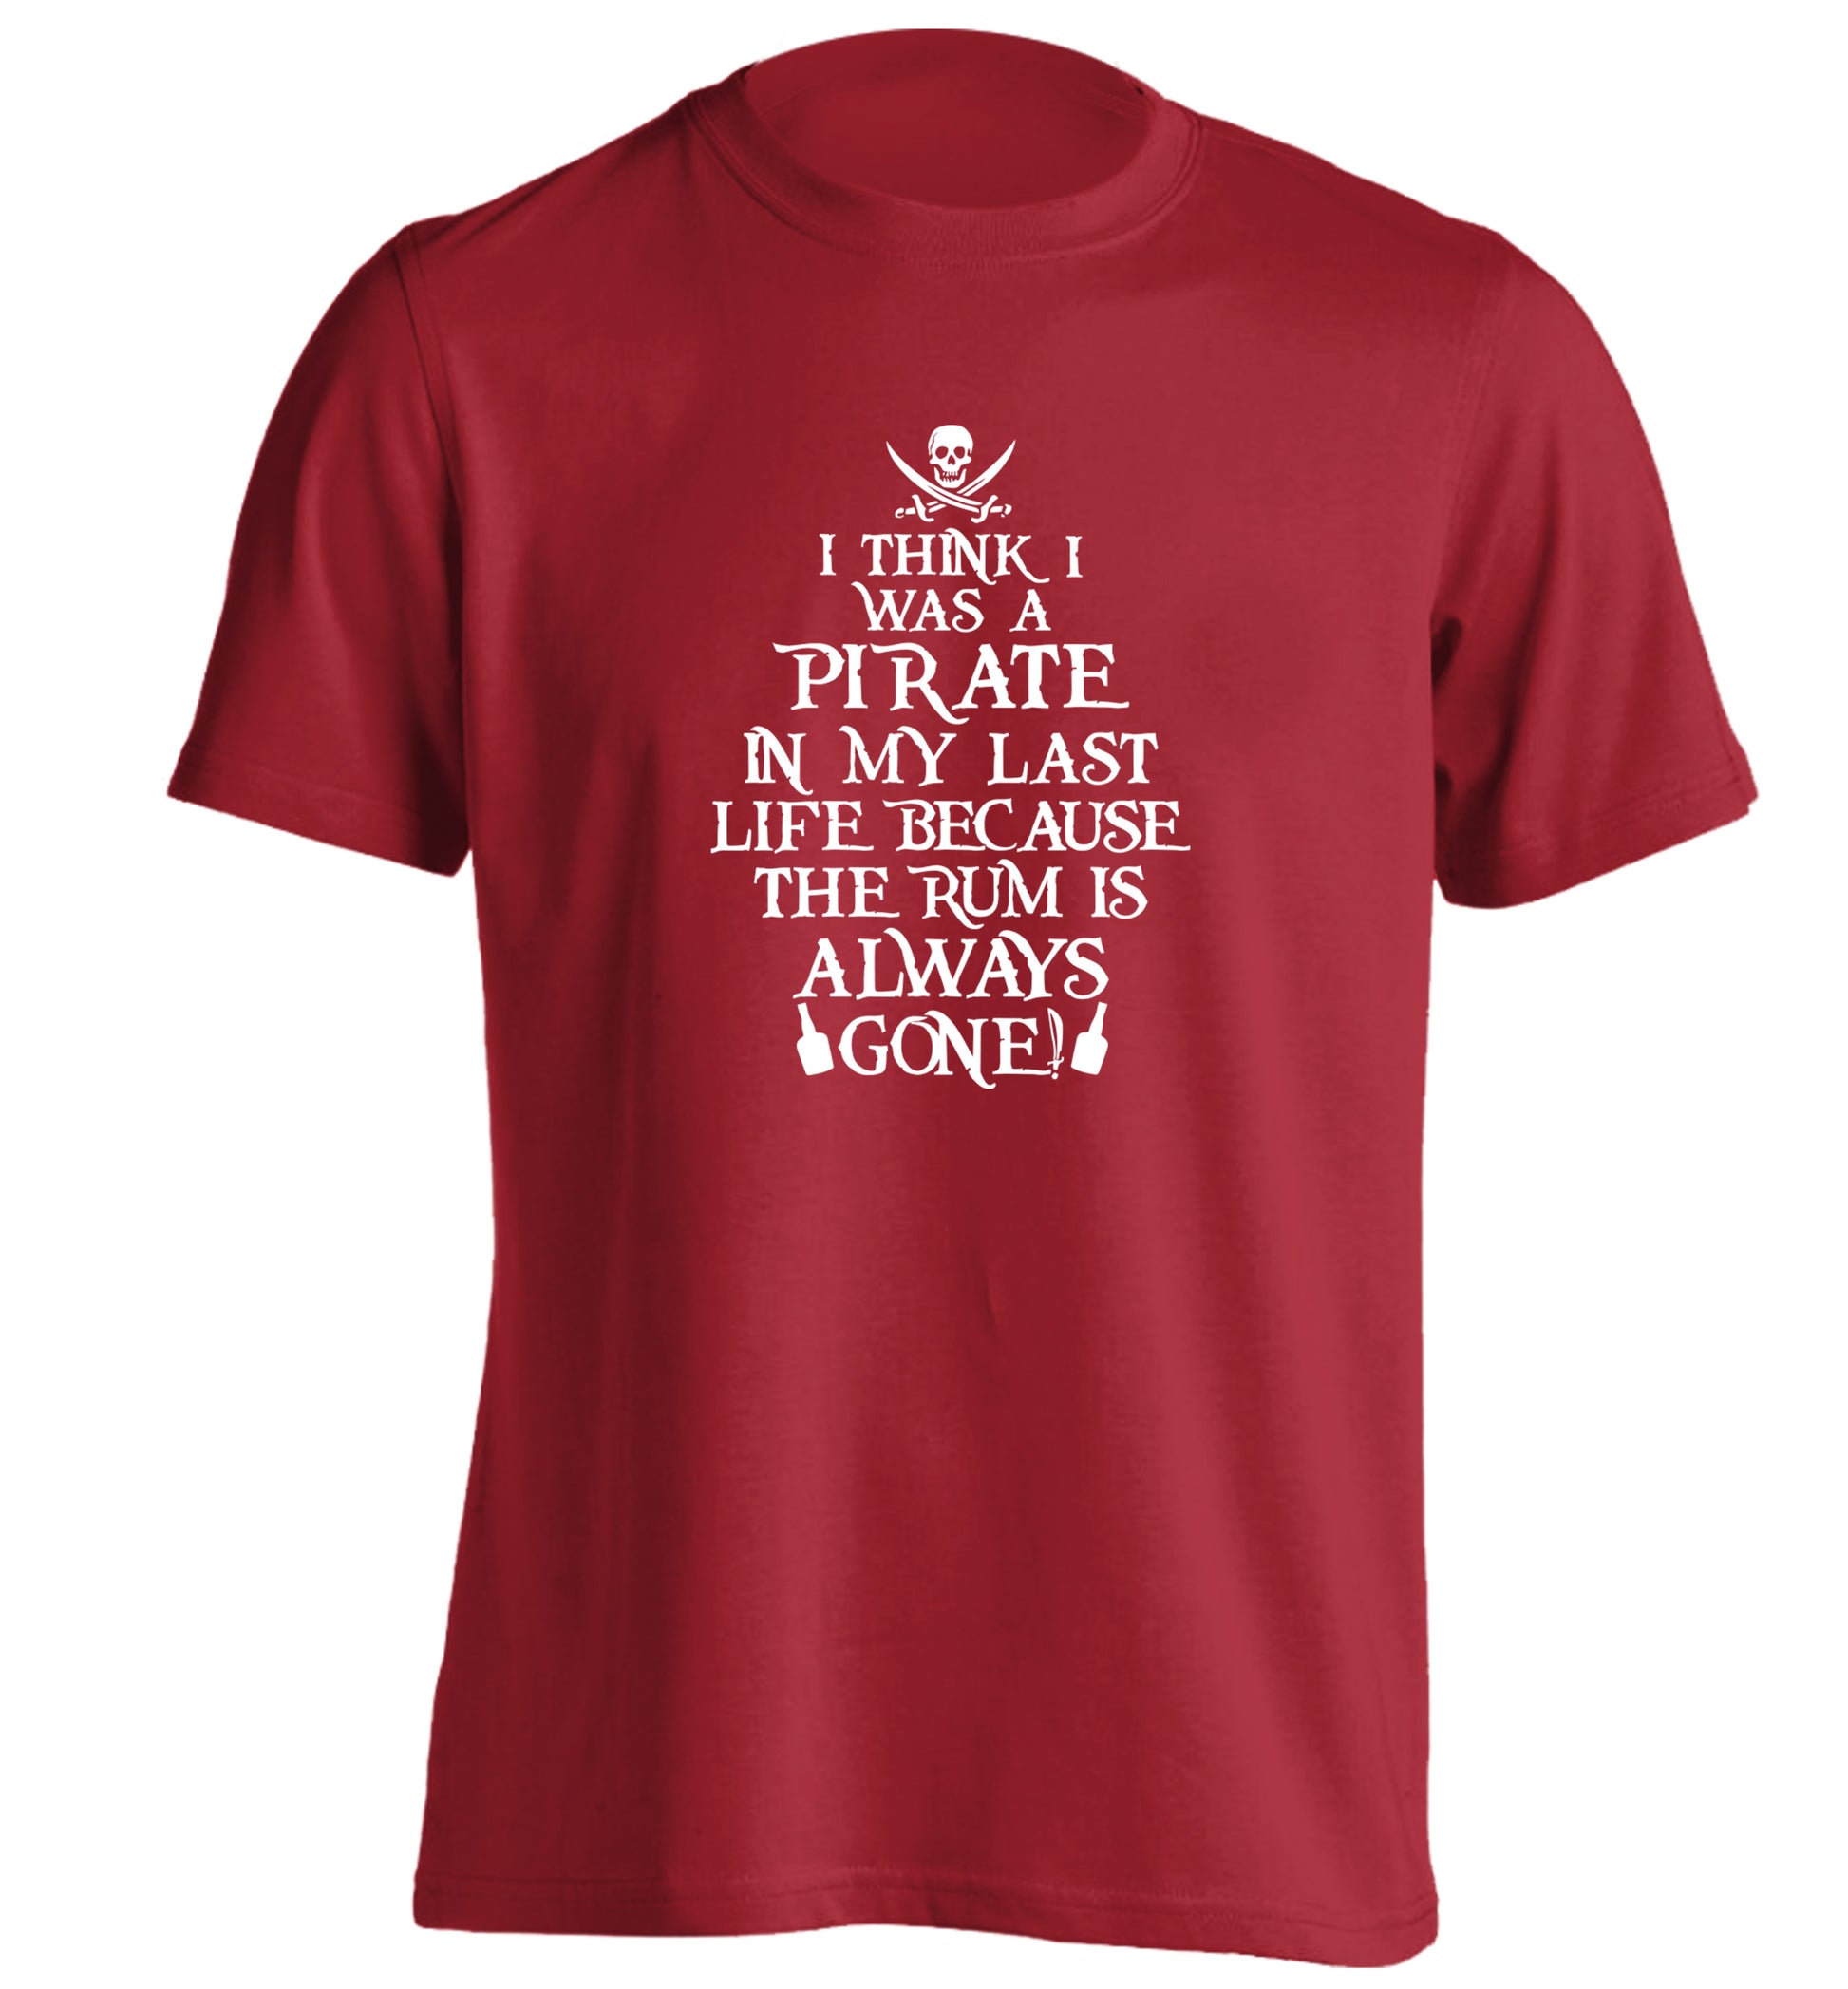 I think I was a pirate in my past life because the rum is always gone! adults unisex red Tshirt 2XL